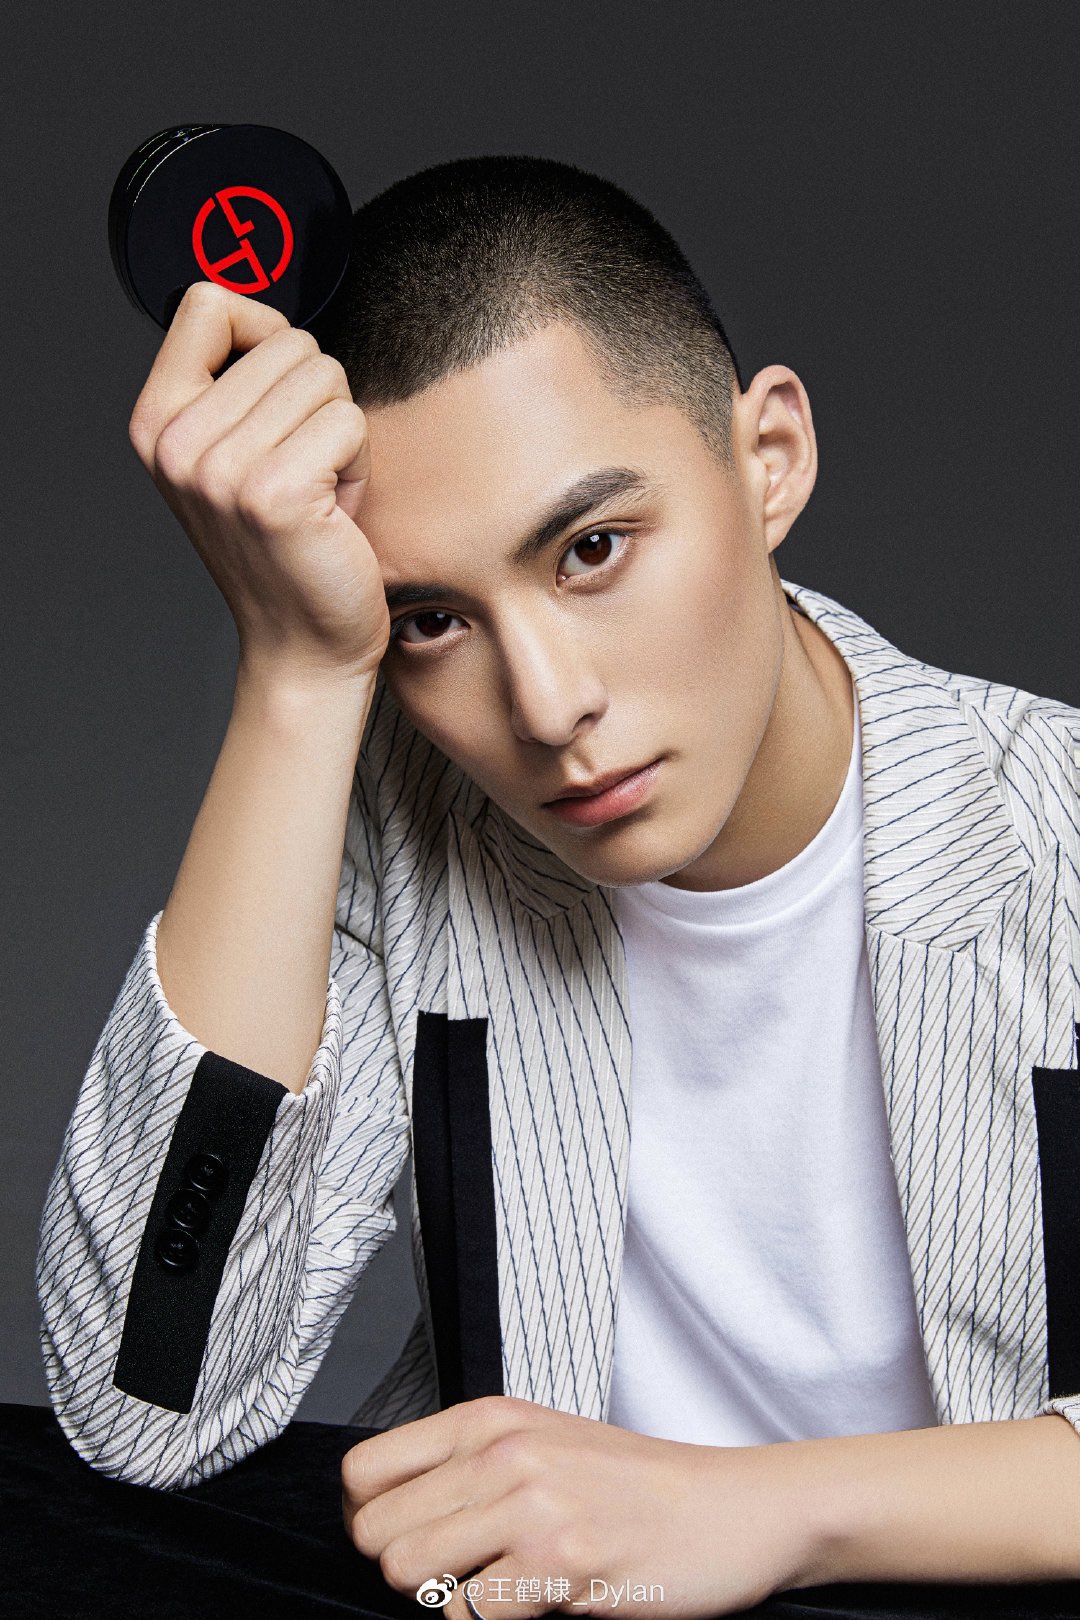 dylan wang hairstyle